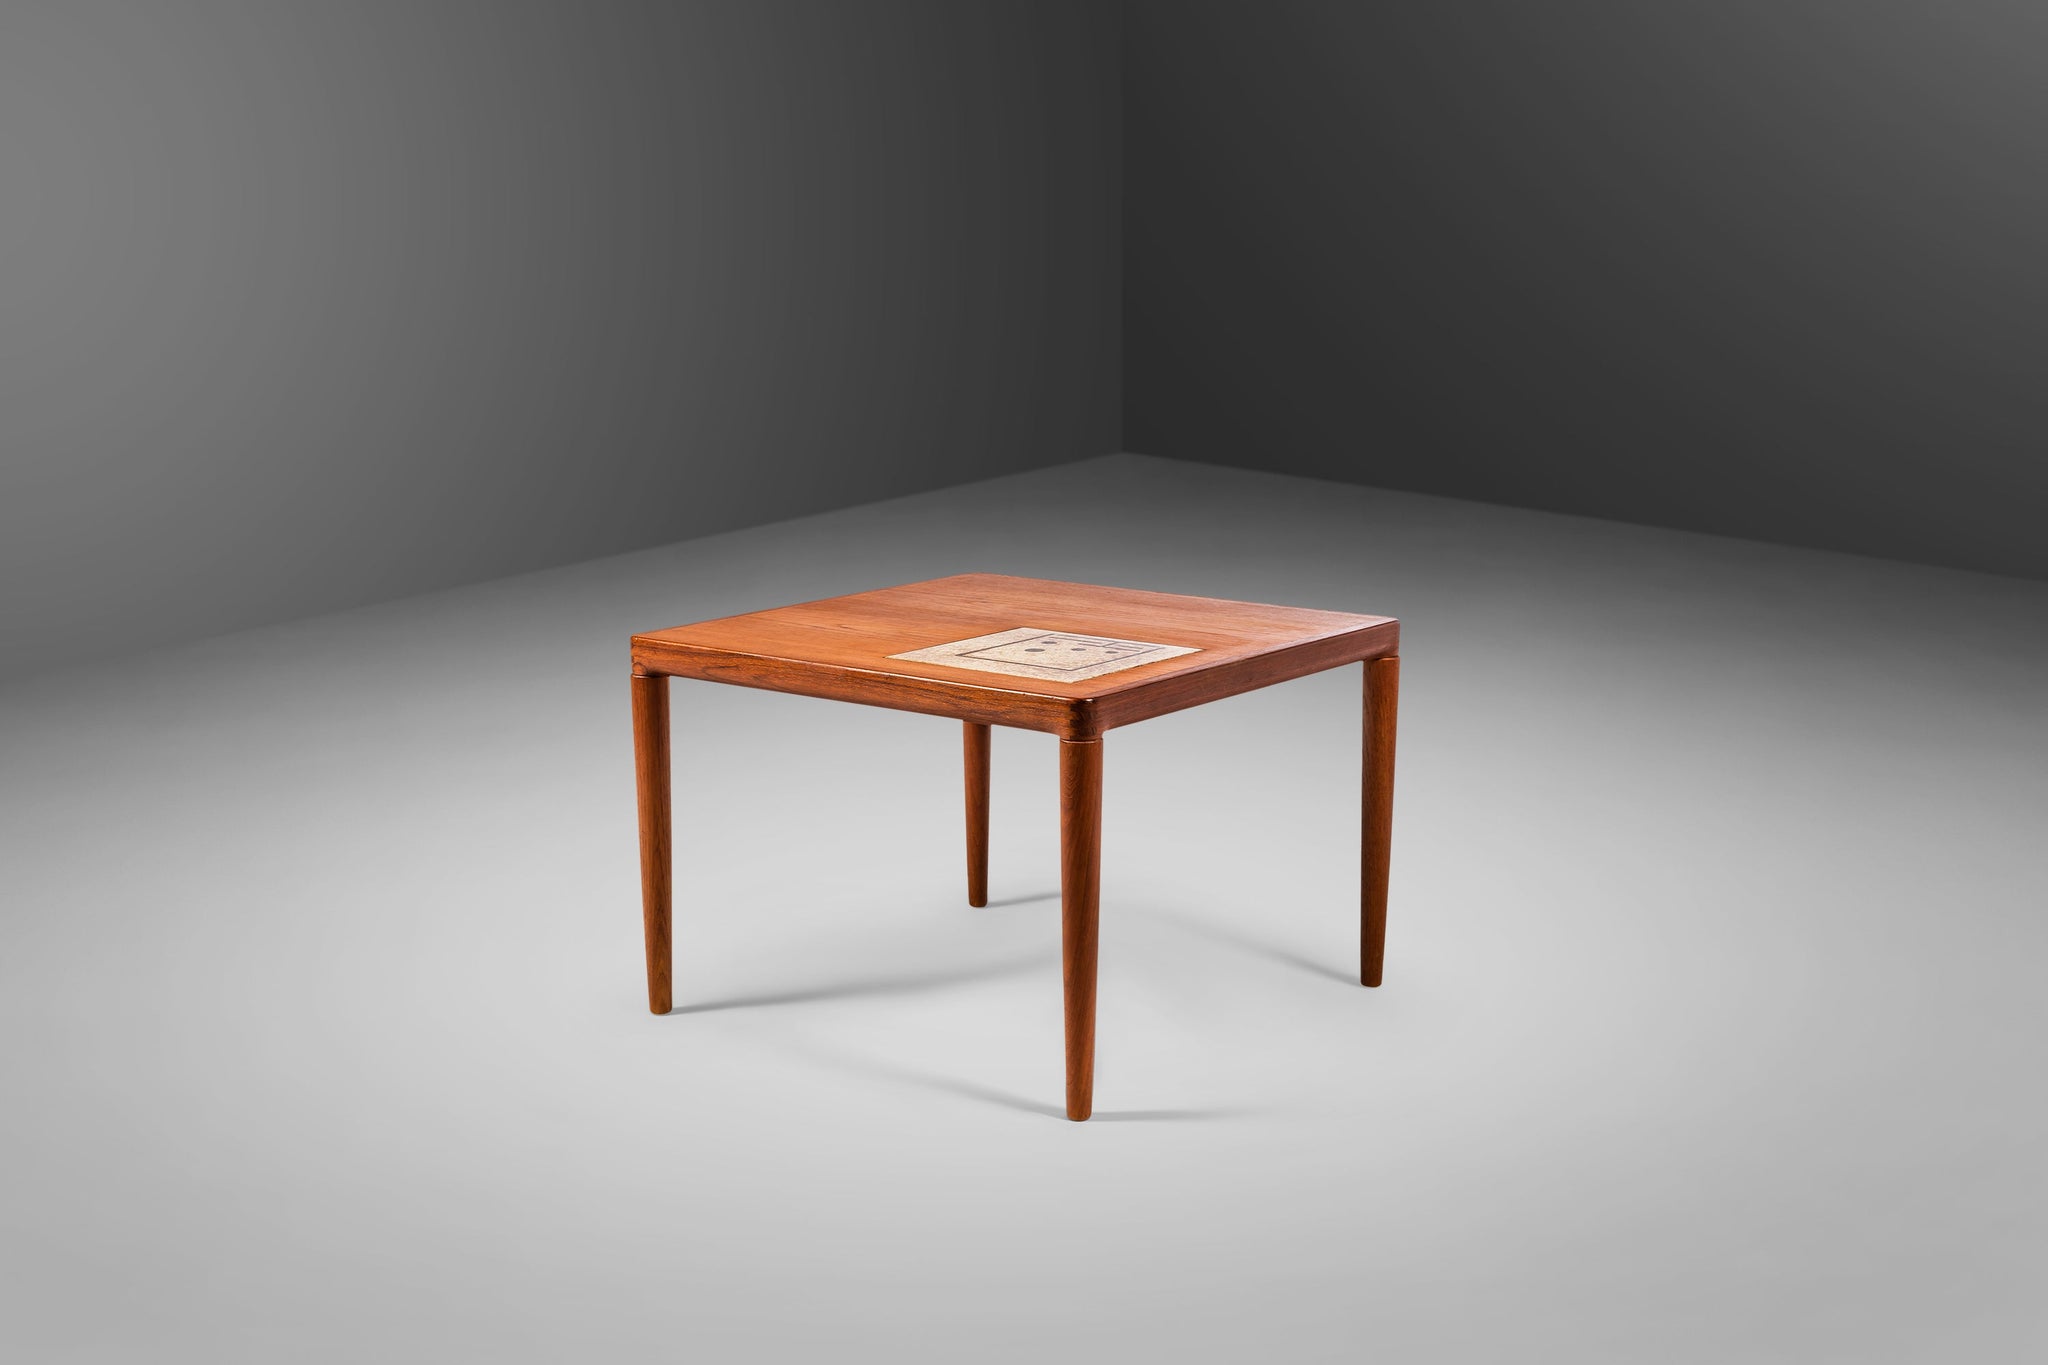 Teak End Table / Side Table with Tile Inlay by HW Klein for Bramin, De